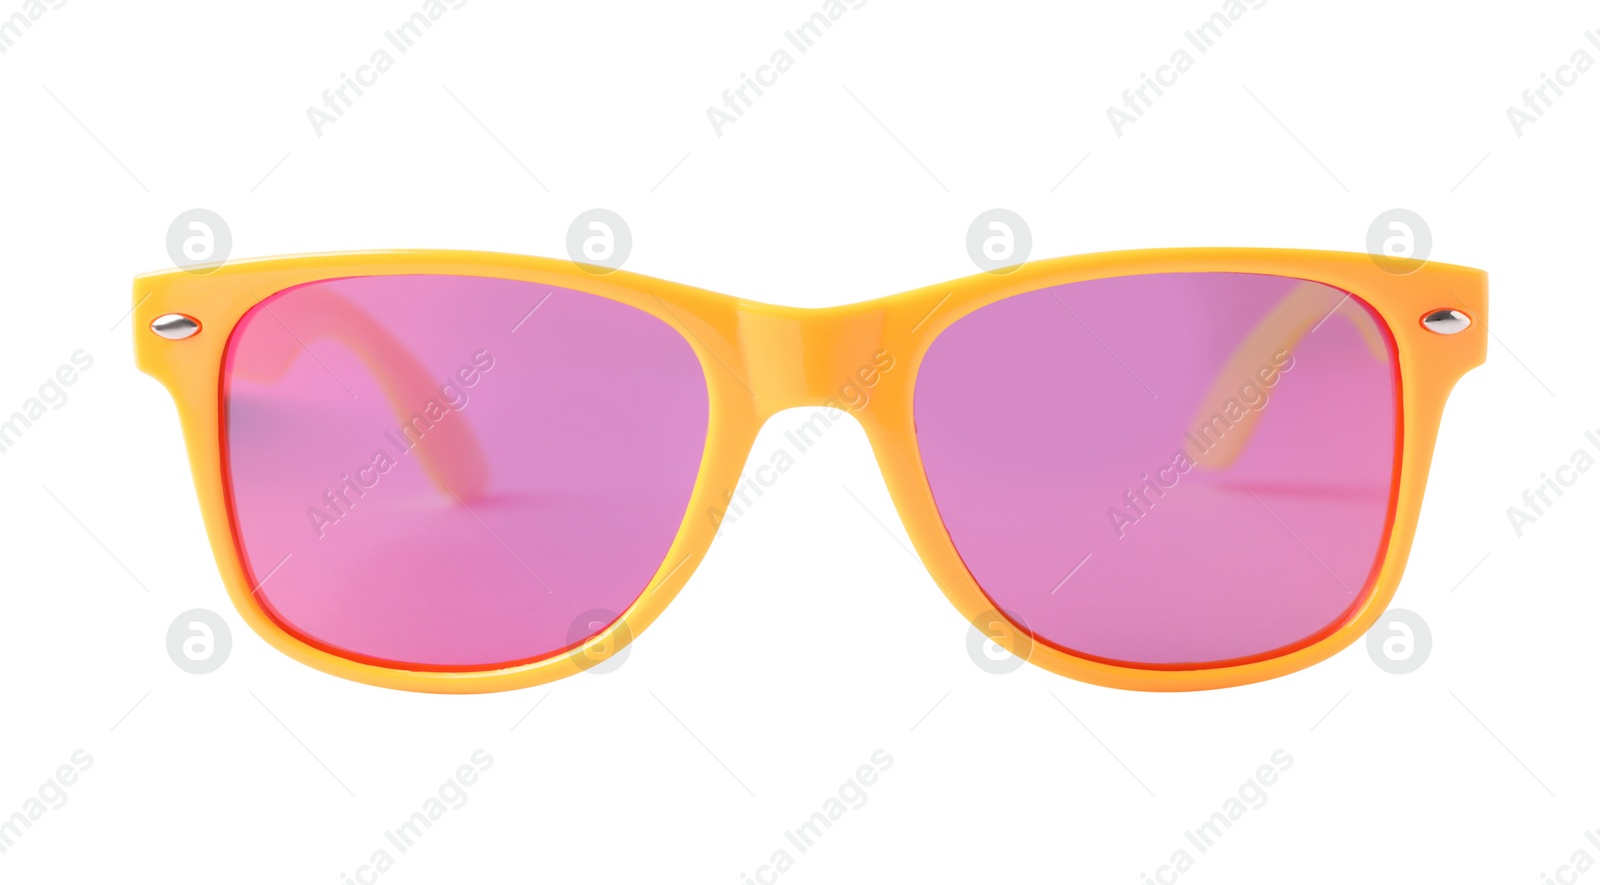 Photo of New stylish sunglasses with yellow frame isolated on white